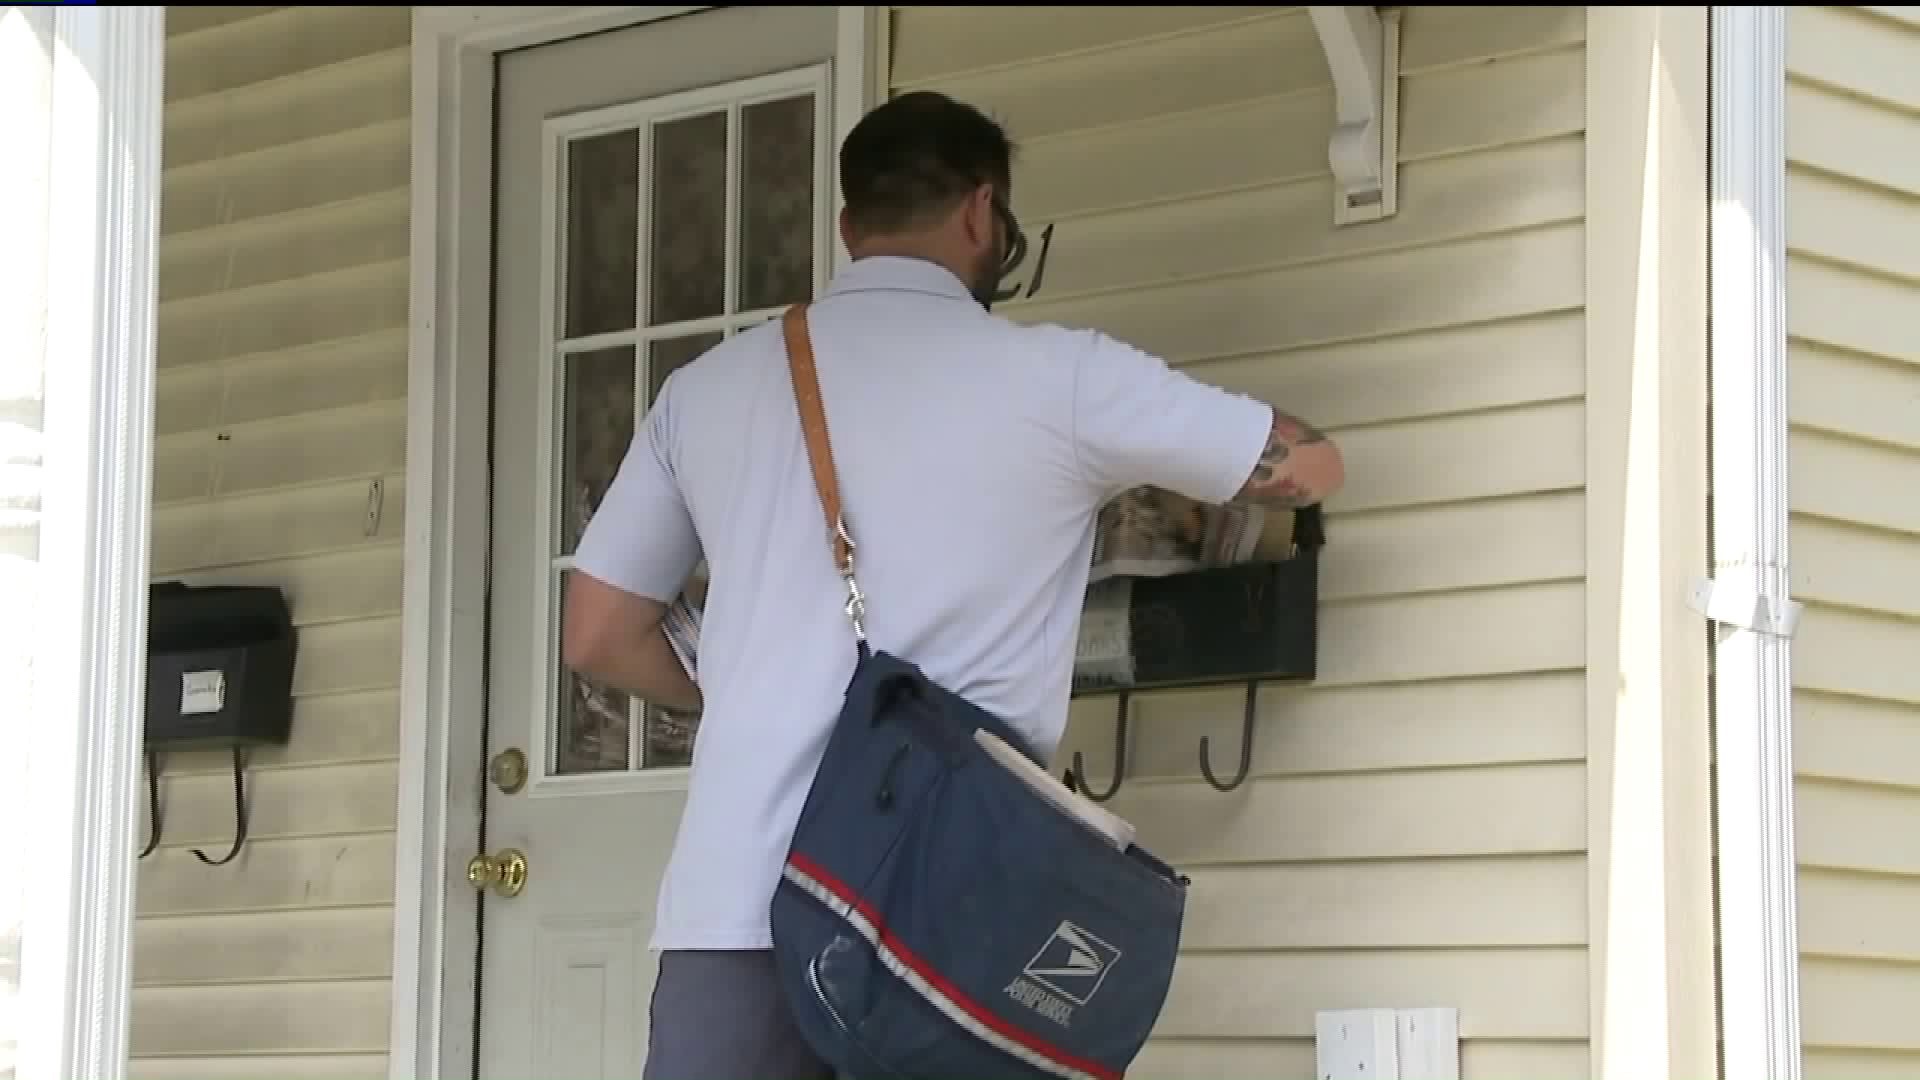 More Mail Carriers Being Bitten by Dogs in Central PA